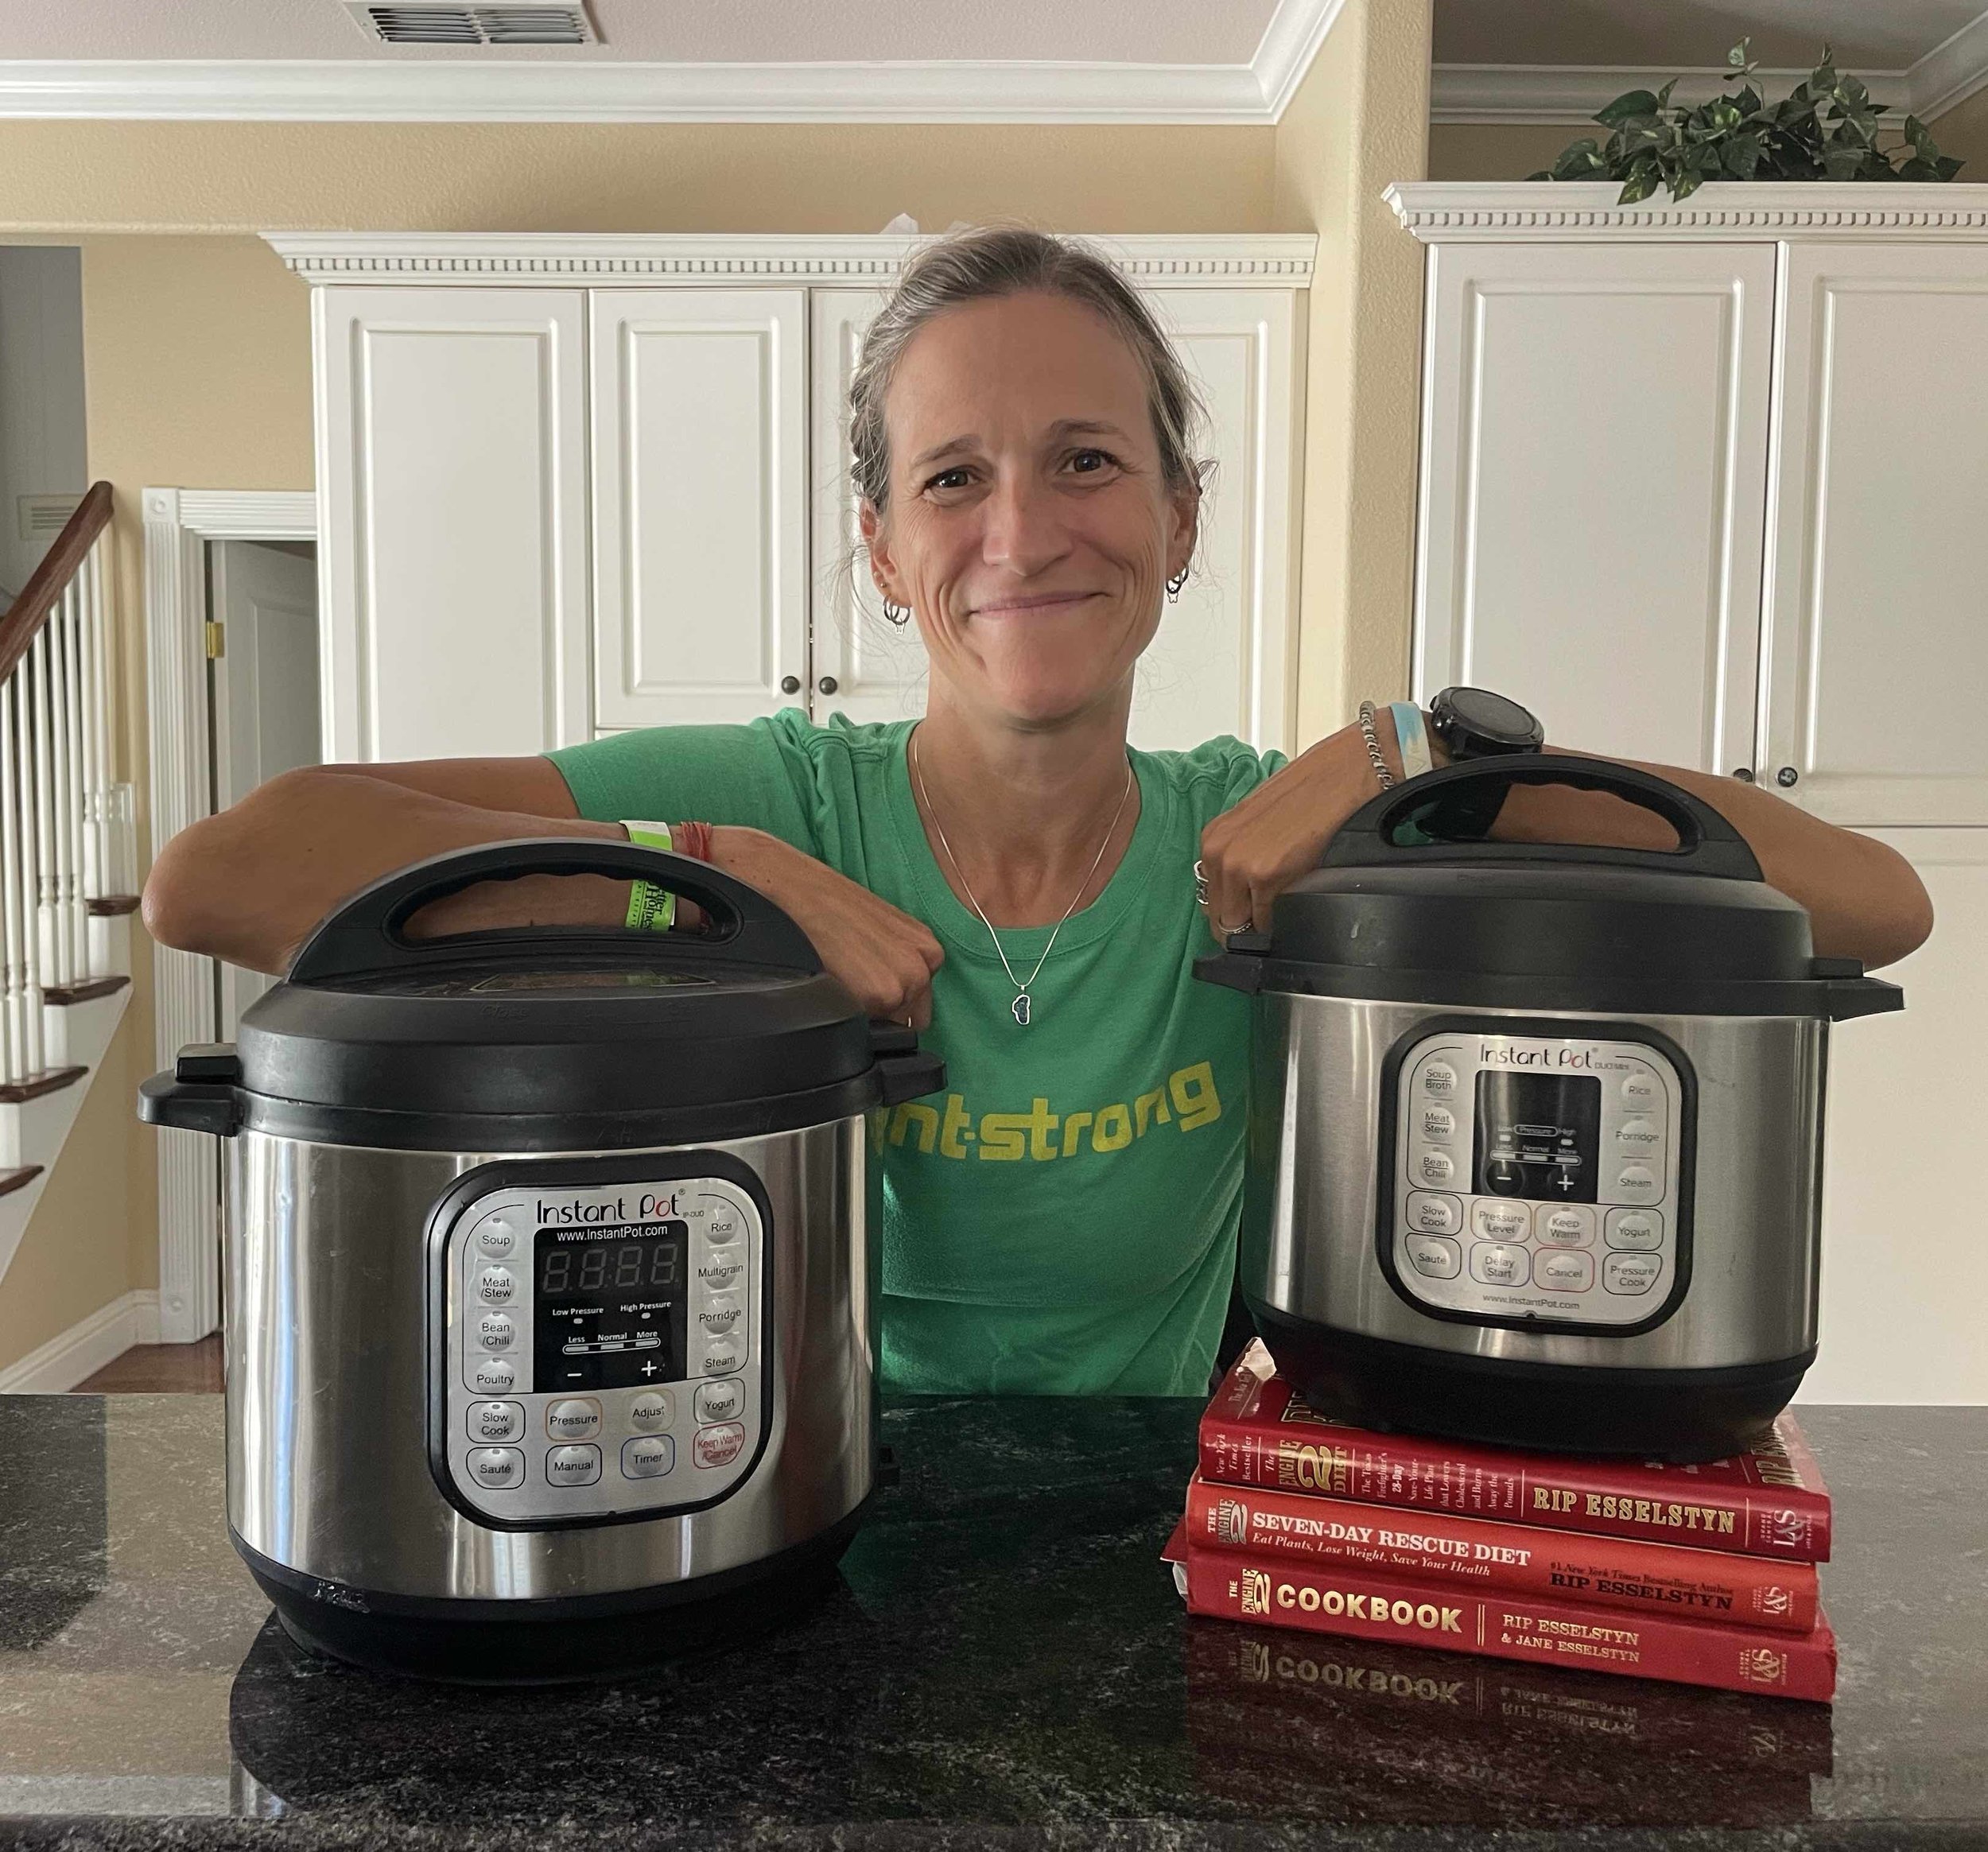 This is your last chance to get these Instant Pots -- and Instant